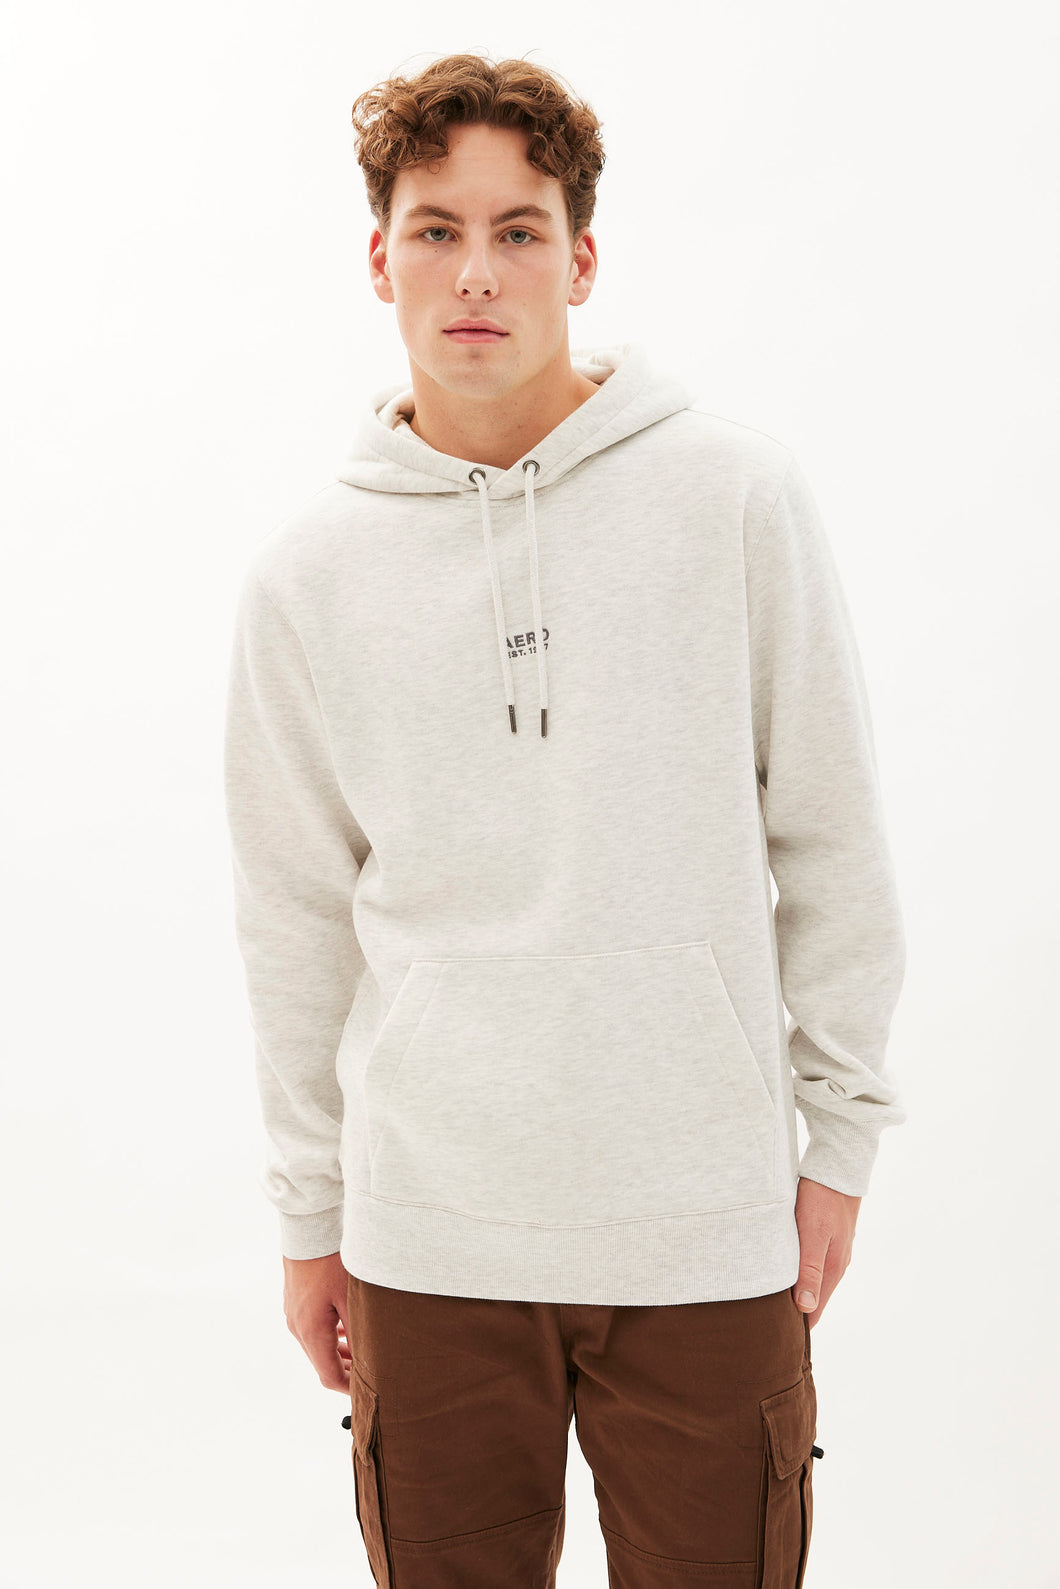 Aéropostale Embroidered Fleece Pullover Hoodie – Bluenotes